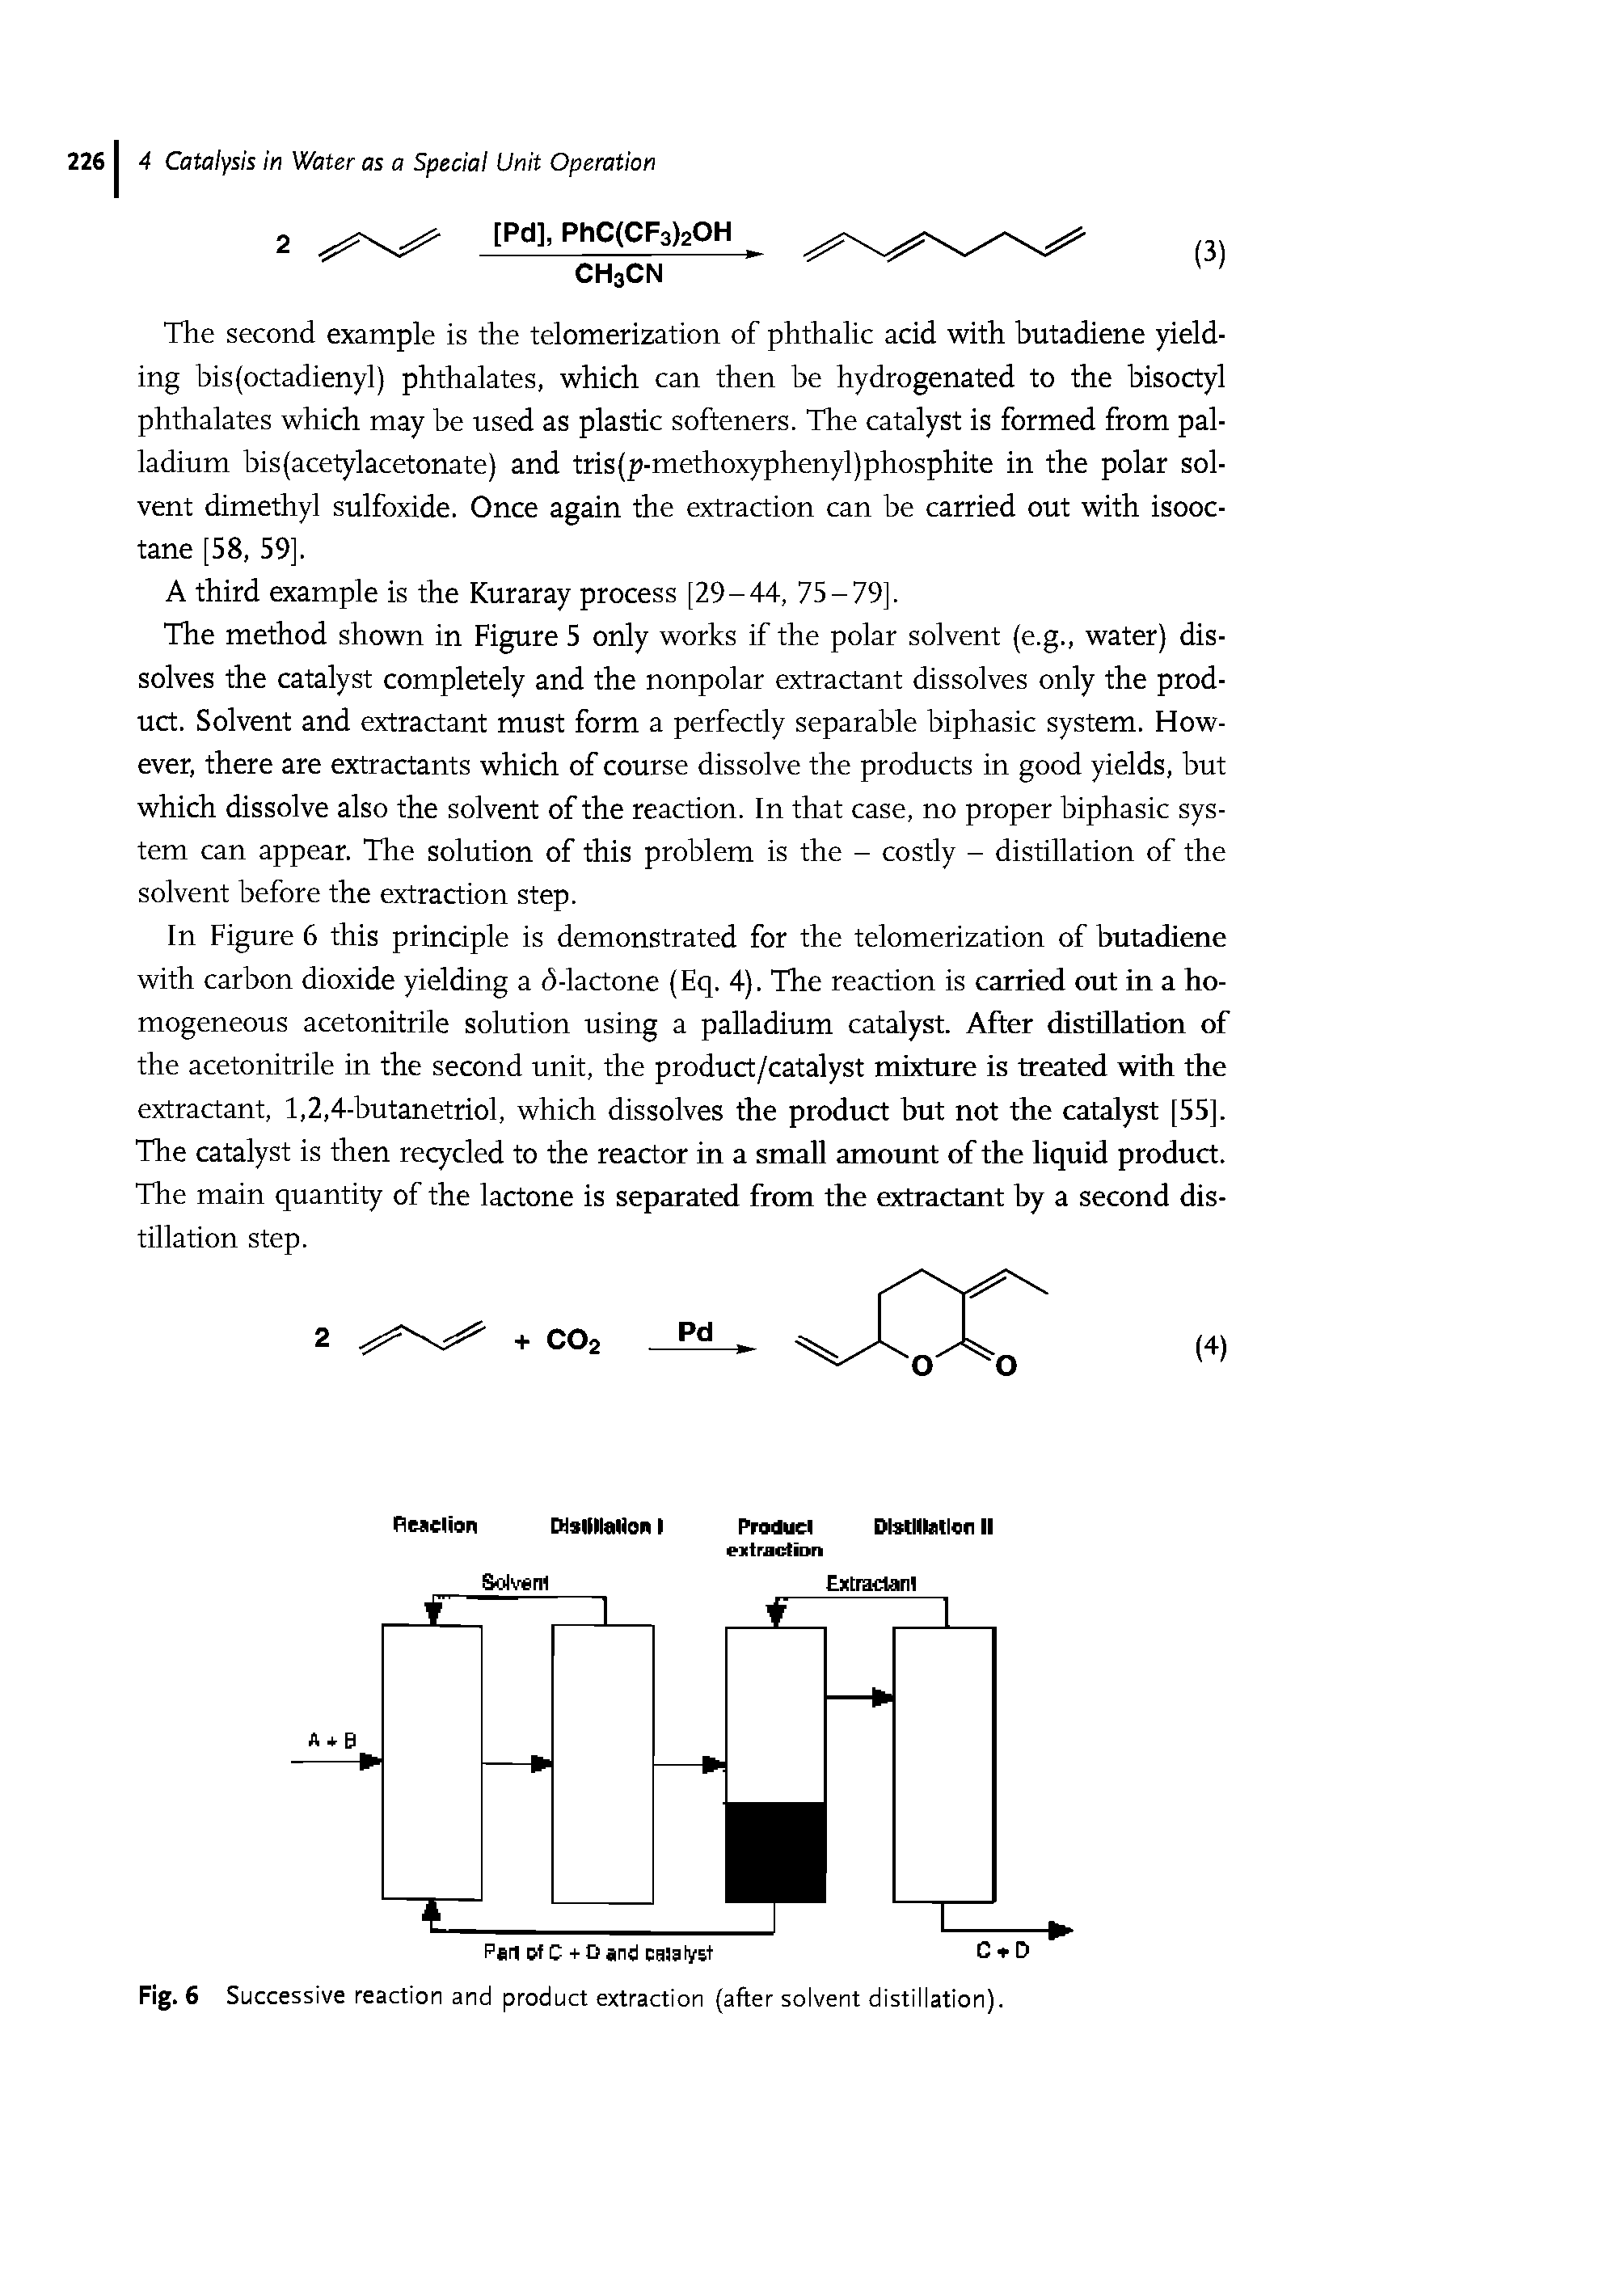 Fig. 6 Successive reaction and product extraction (after solvent distillation).